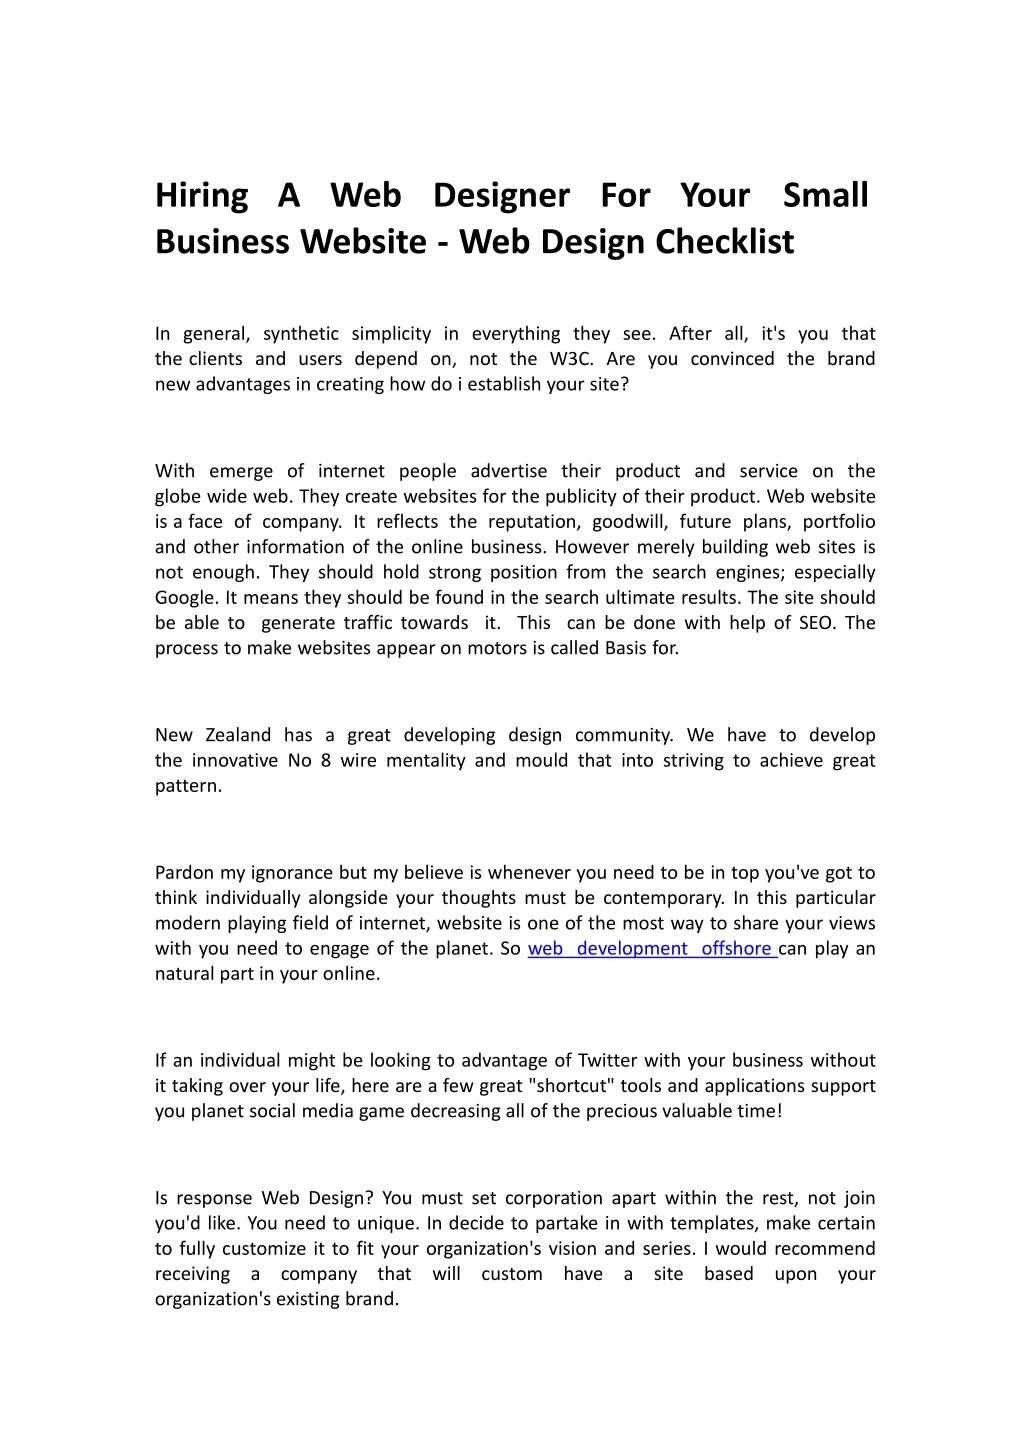 hiring a web designer for your small business